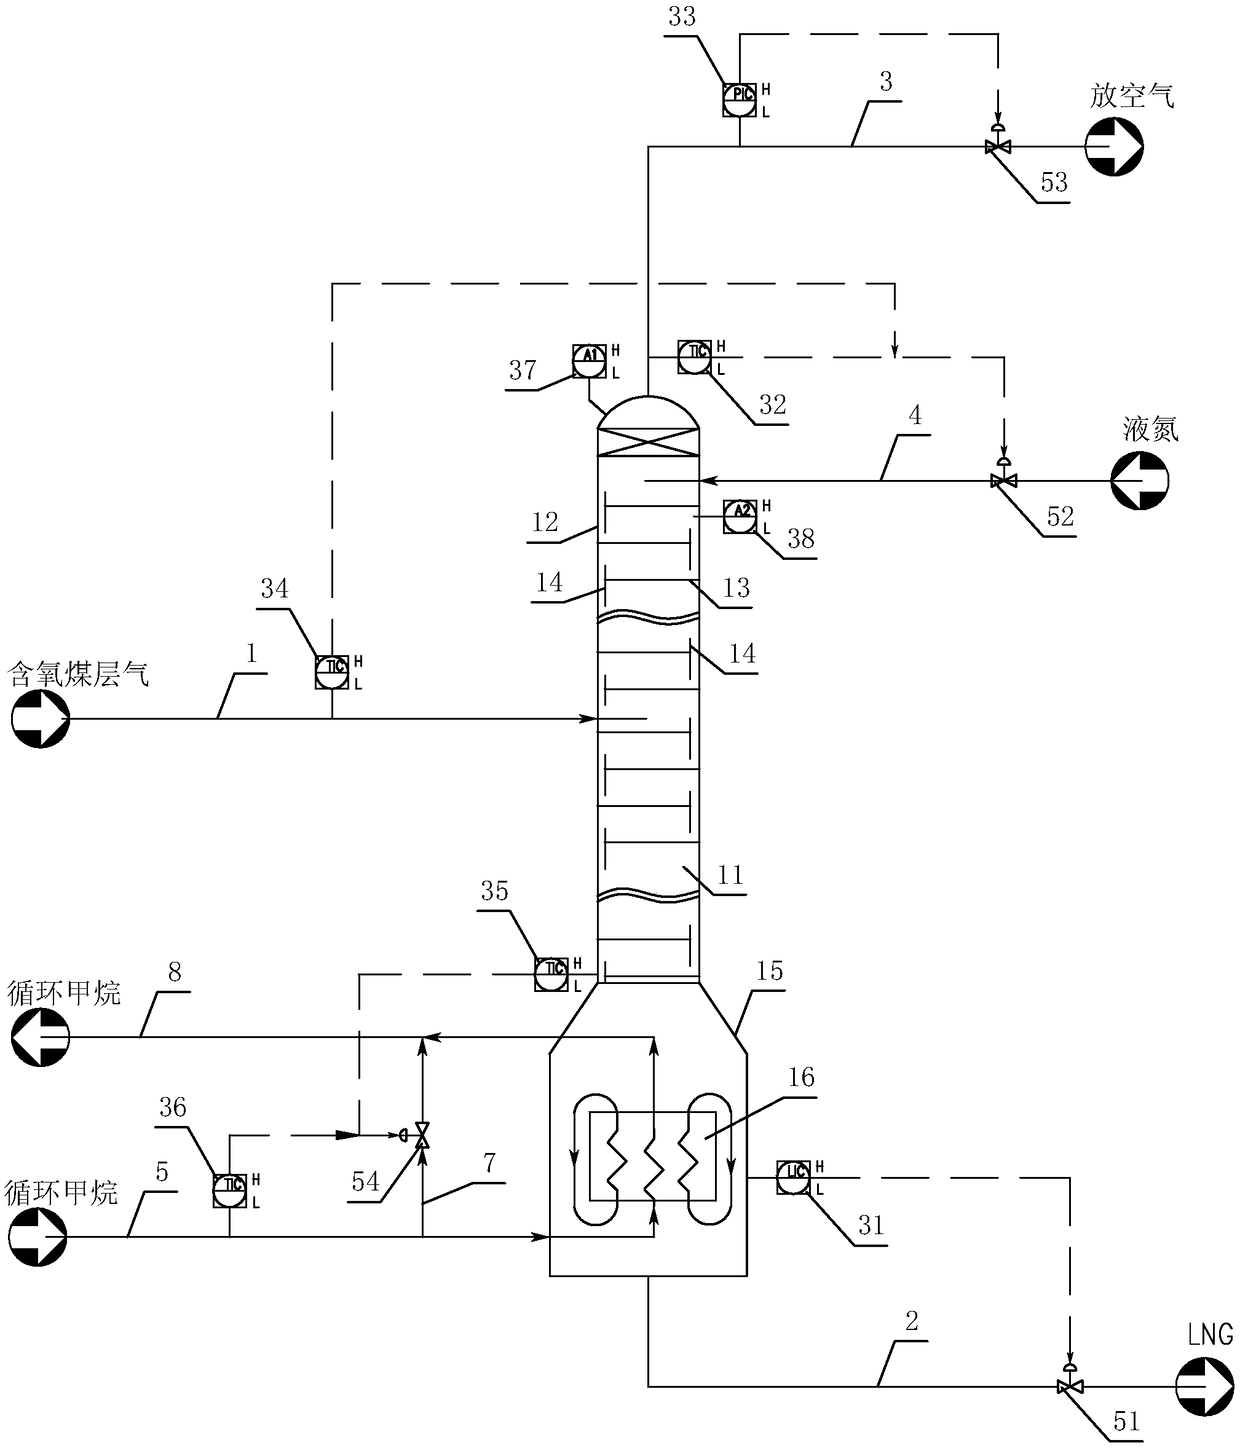 Oxygen-containing coal bed gas low-temperature rectification system and method capable of avoiding explosion limits